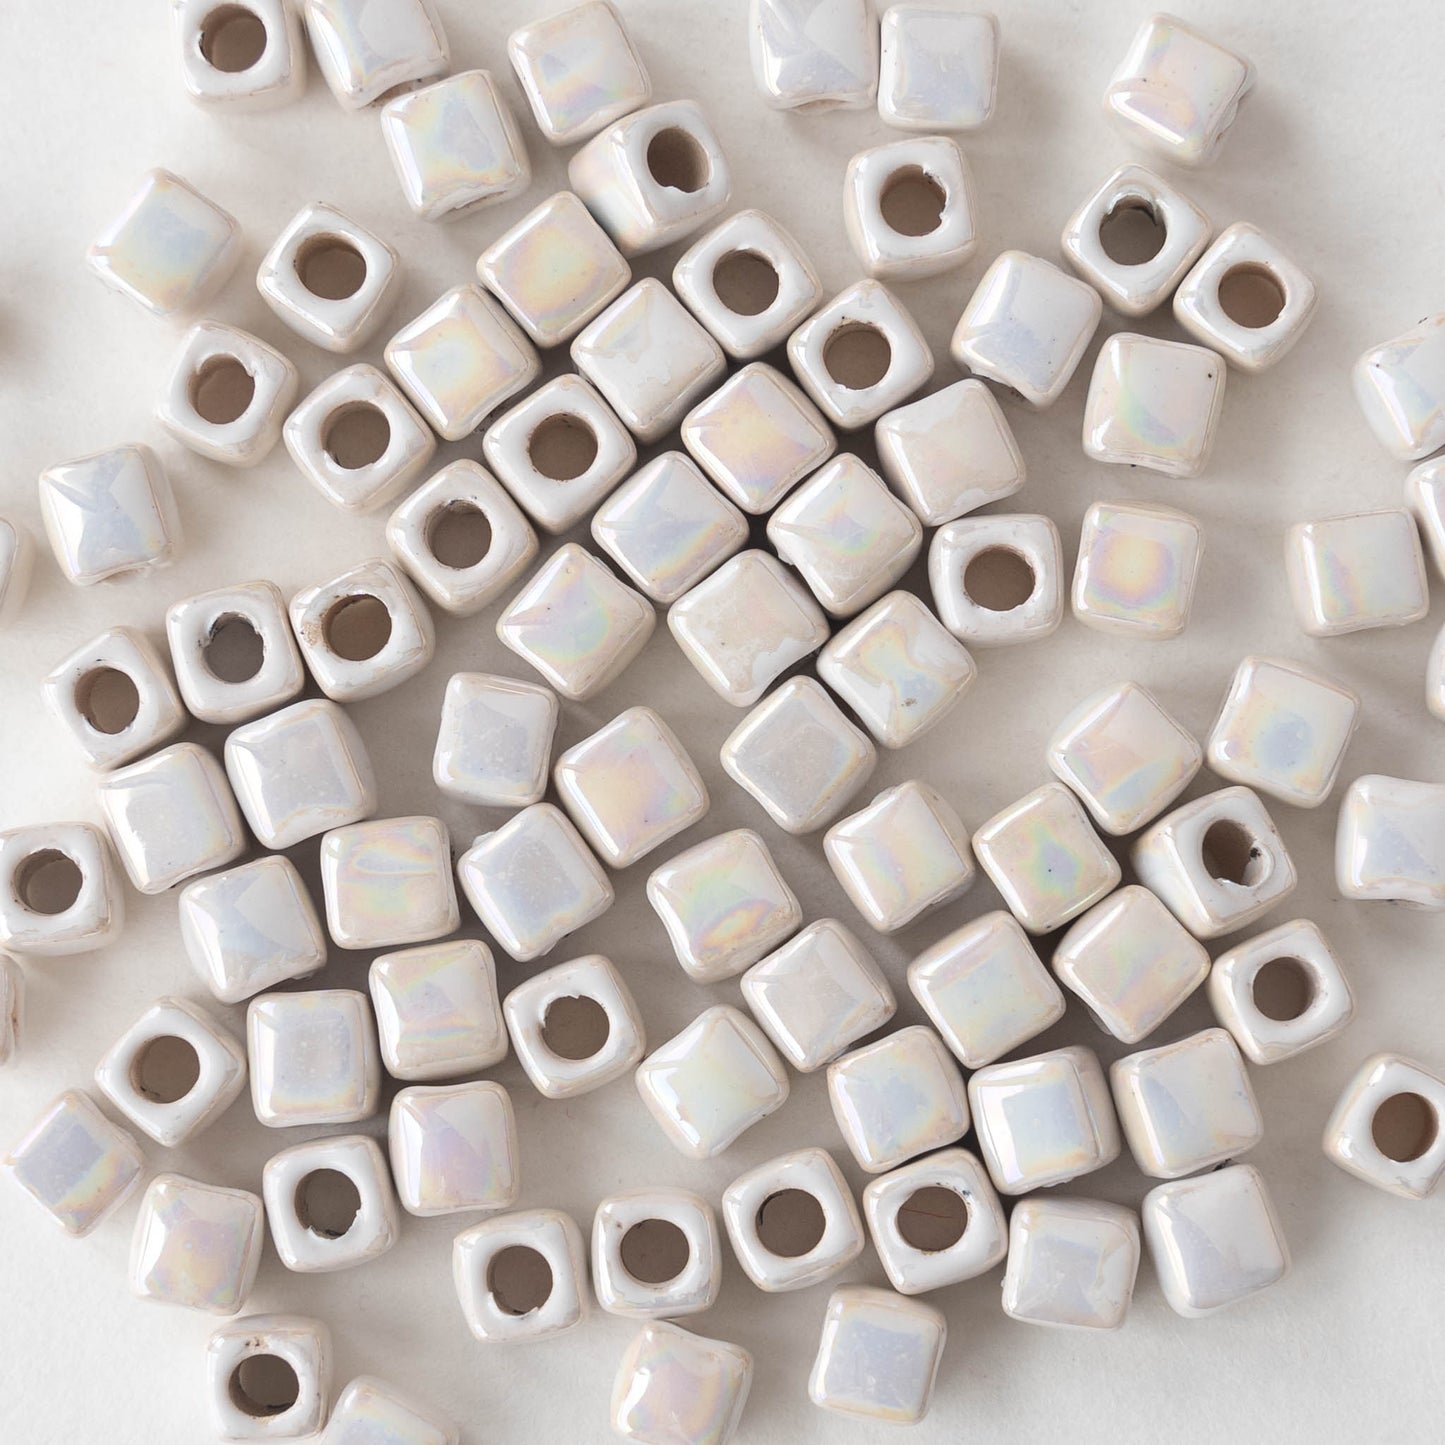 Load image into Gallery viewer, 5.5mm Ceramic Cube Beads - Iridescent Ivory Opal Luster - 10 or 30 beads
